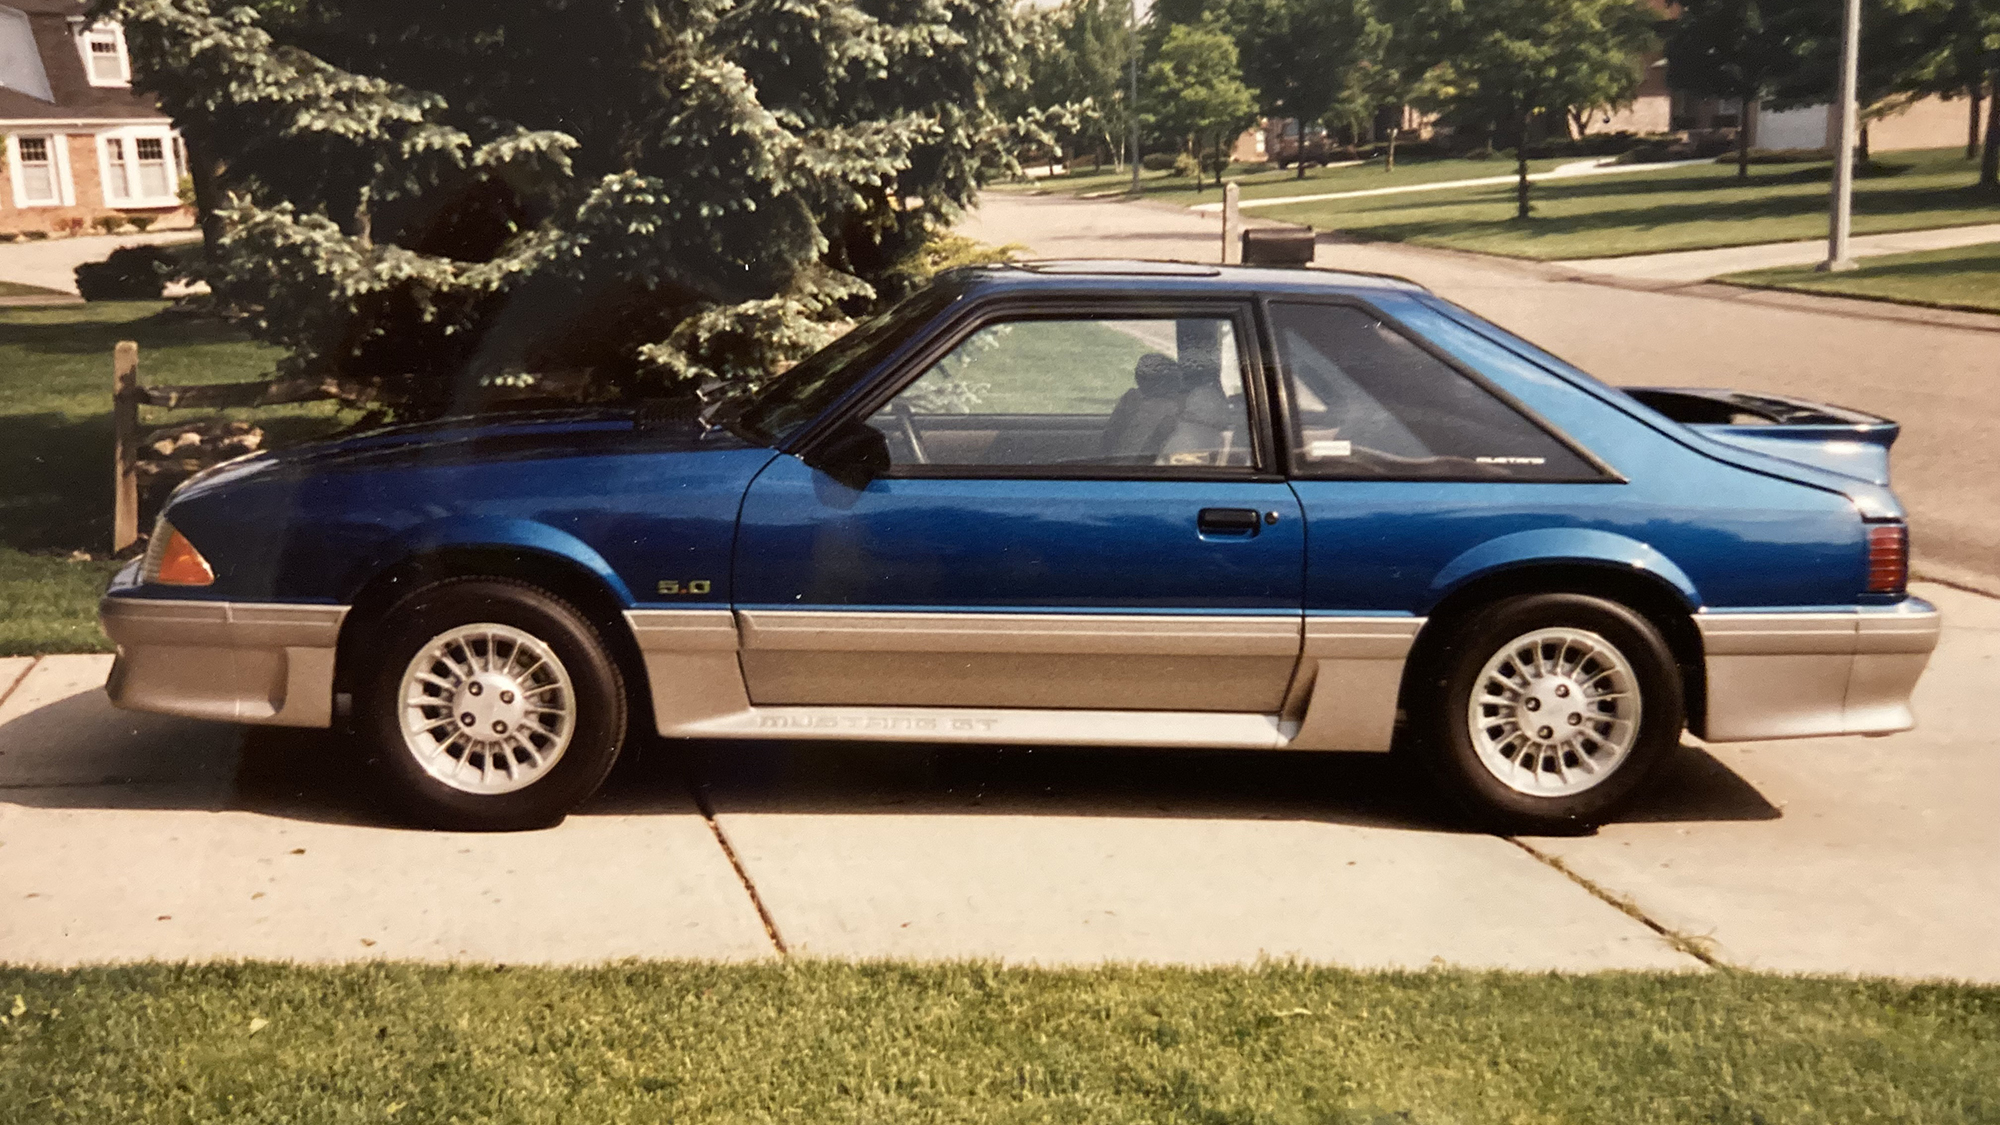 Laurie Transou, who recently took over as Lead Program Engineer for the Ford Mustang, had this 1991...